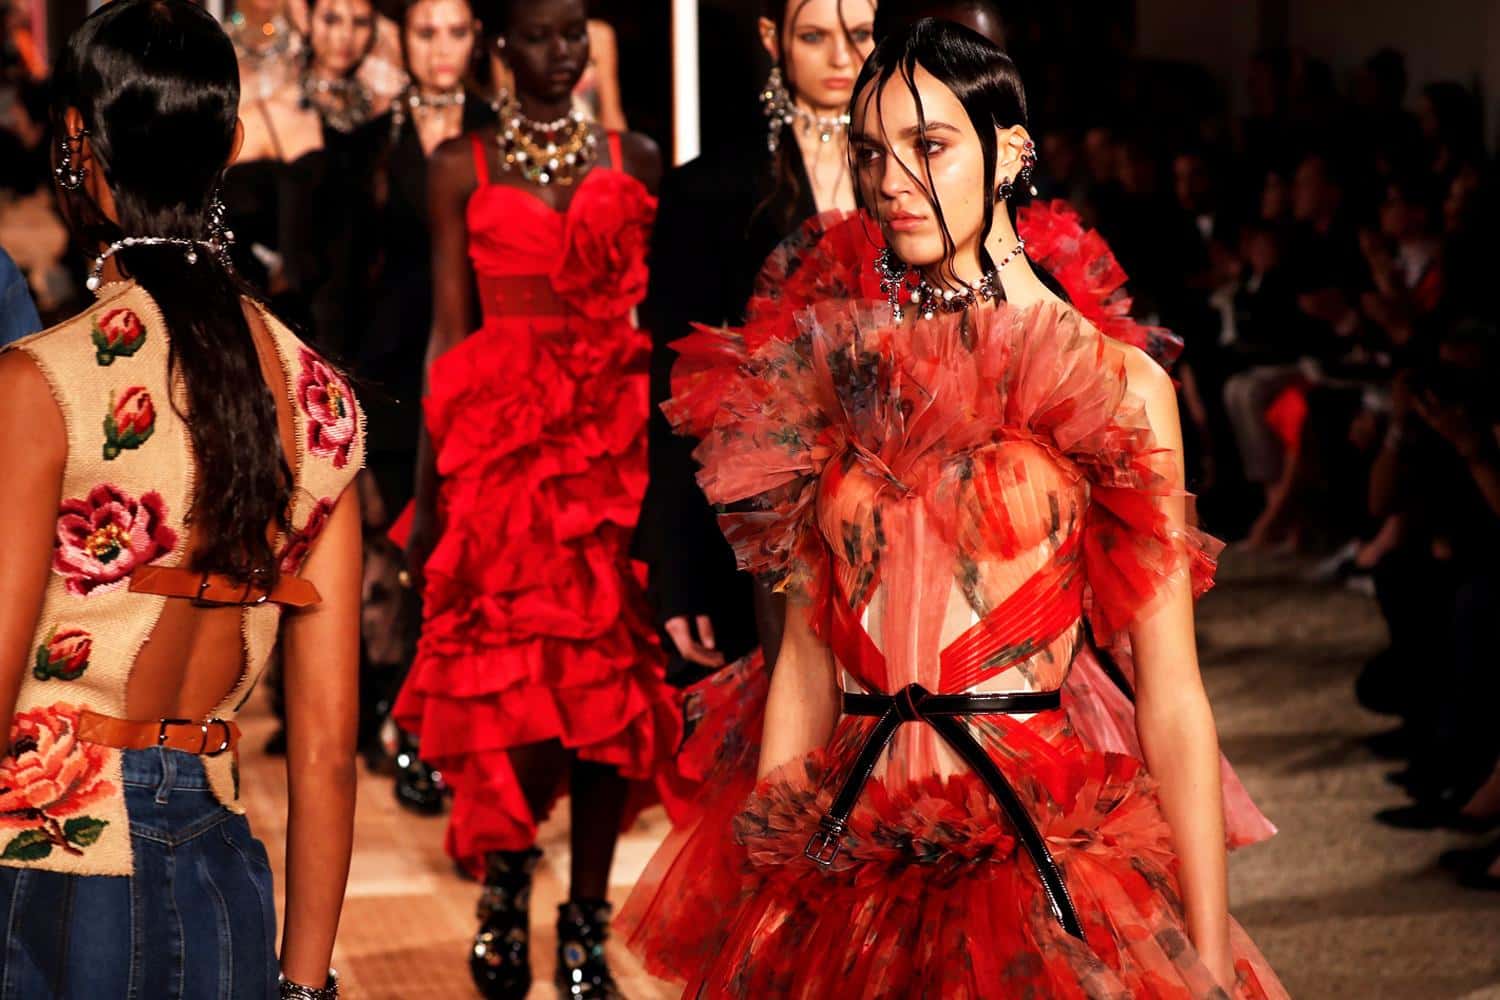 41 Fashionable Facts About Alexander McQueen